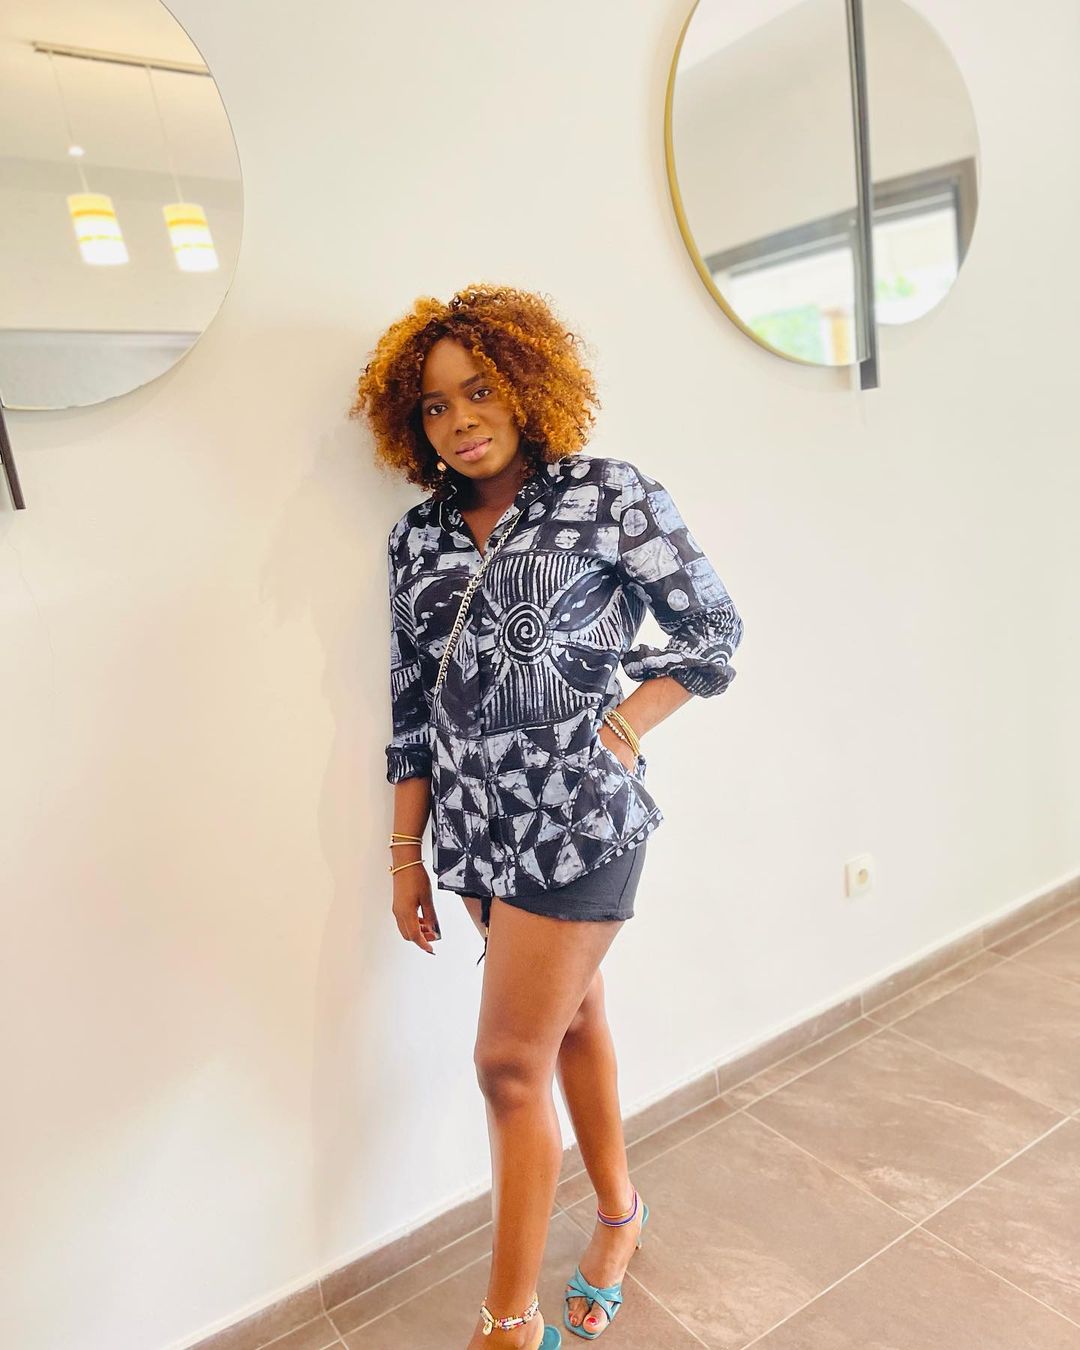 Shirt and short Adire combo by Asologe on Bellafricana Marketplace